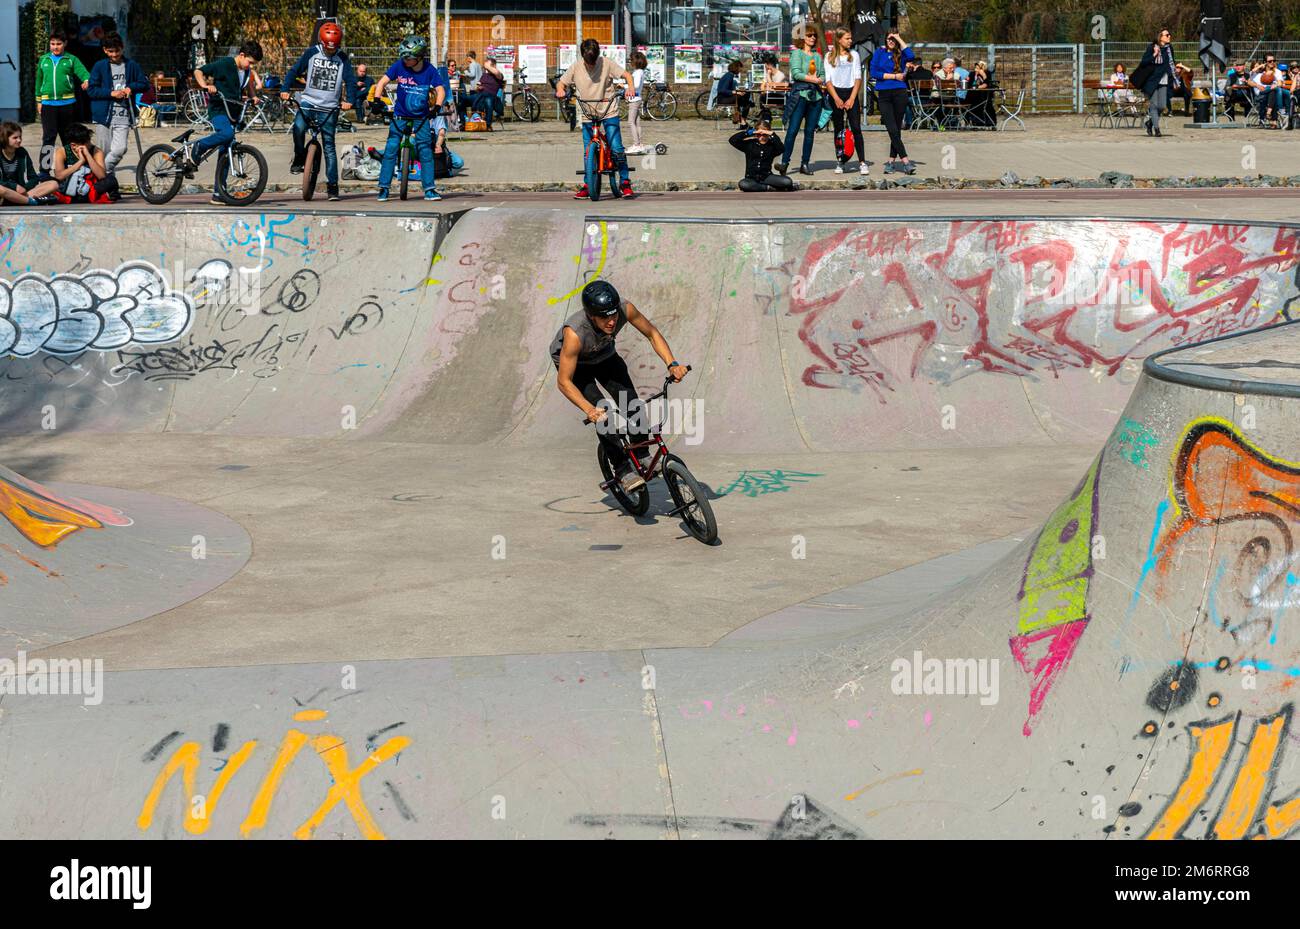 Skateboarders and cyclists at a skate pool in the Park am Gleisdreieck in Berlin-Mitte, Berlin, Germany Stock Photo